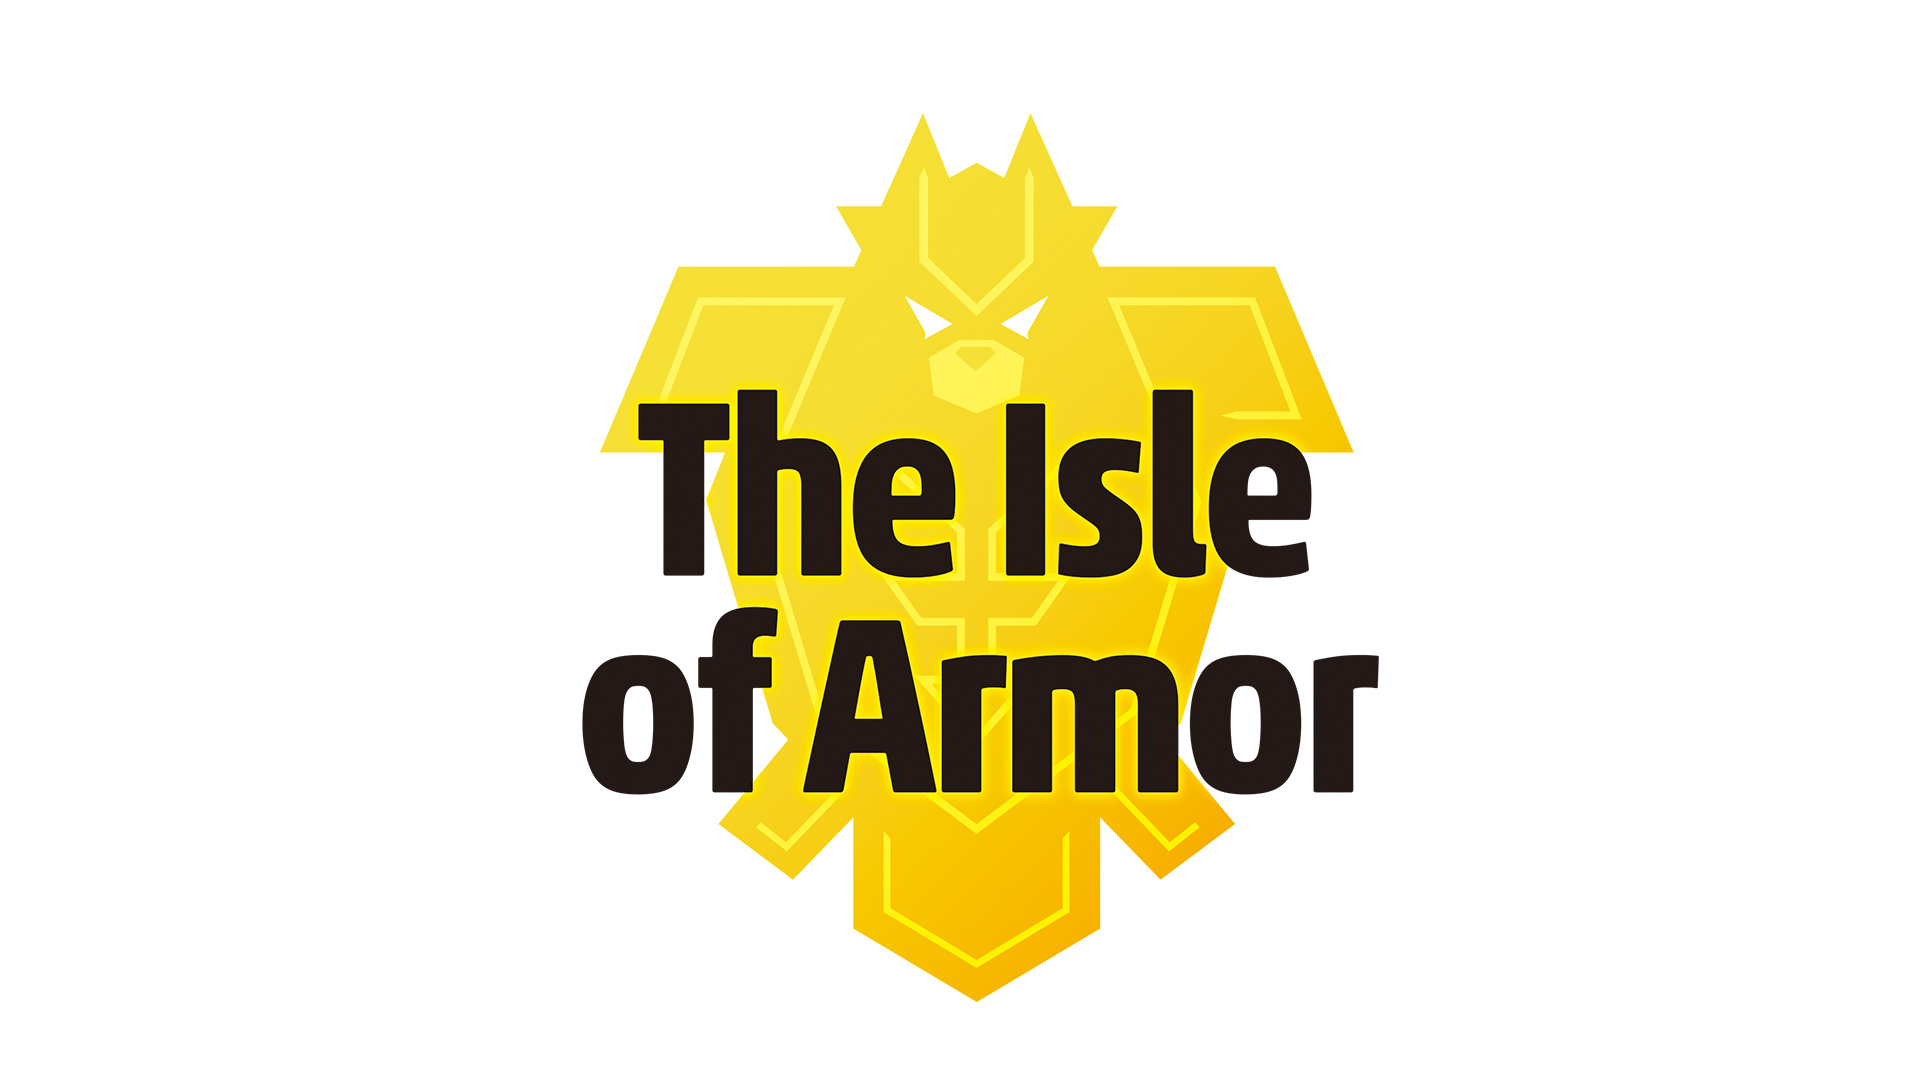 New Features in the Isle of Armor